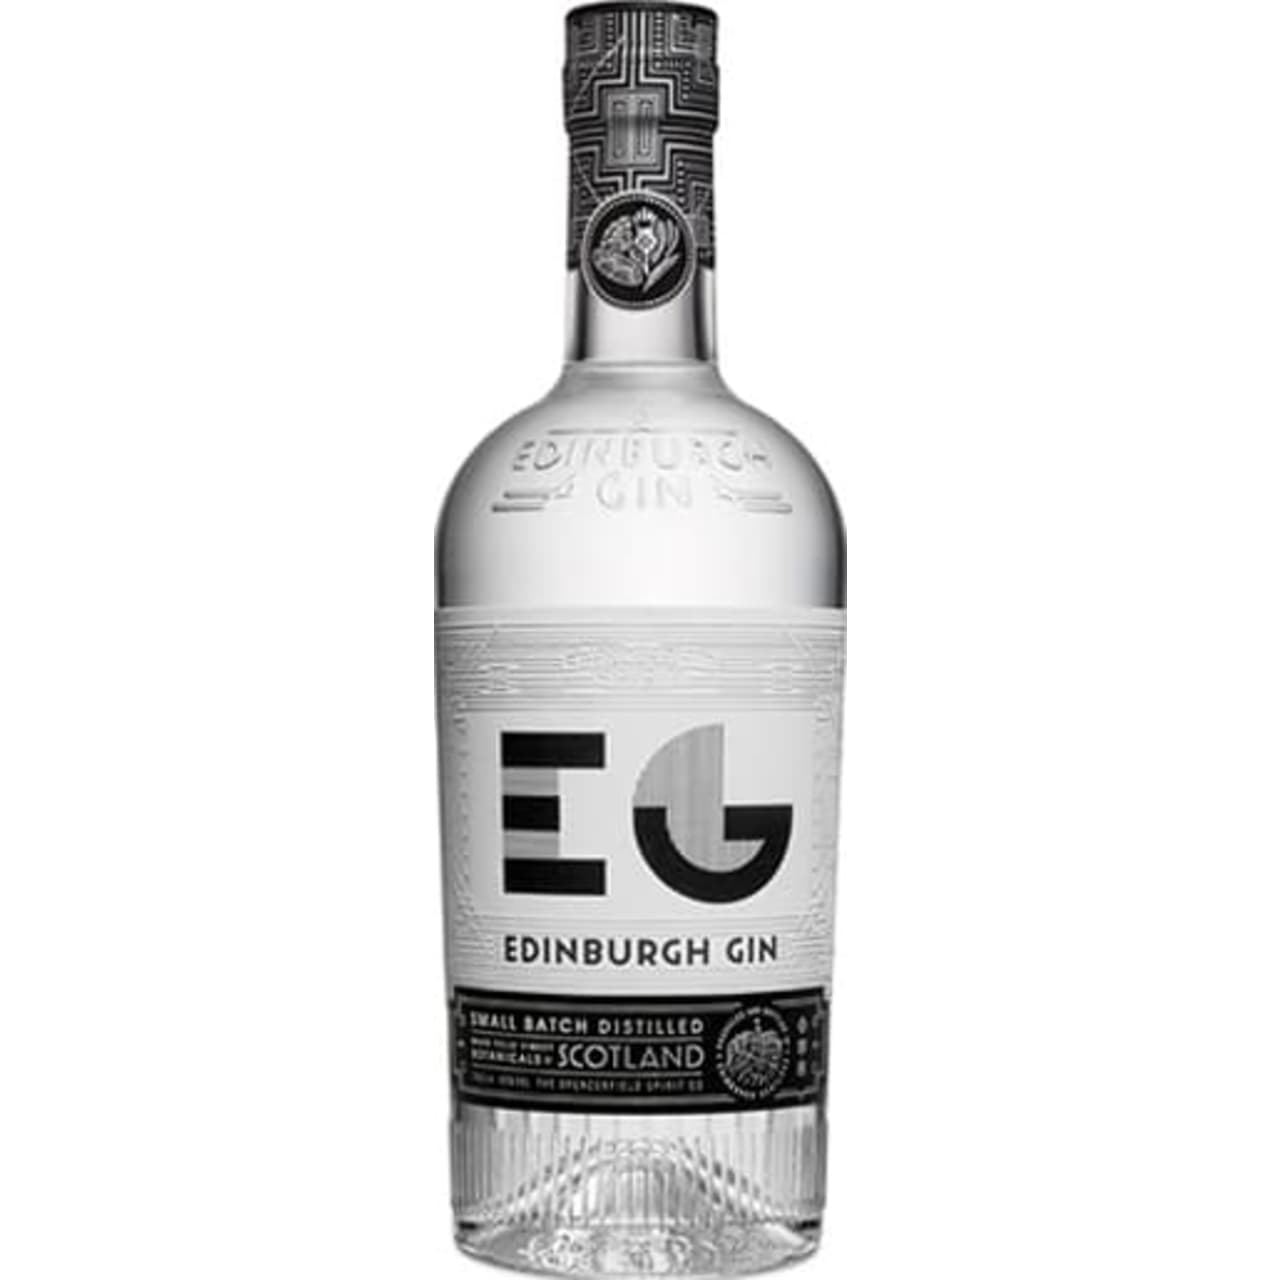 A well balanced crisp gin with gingery spiciness and laid back citrus character.